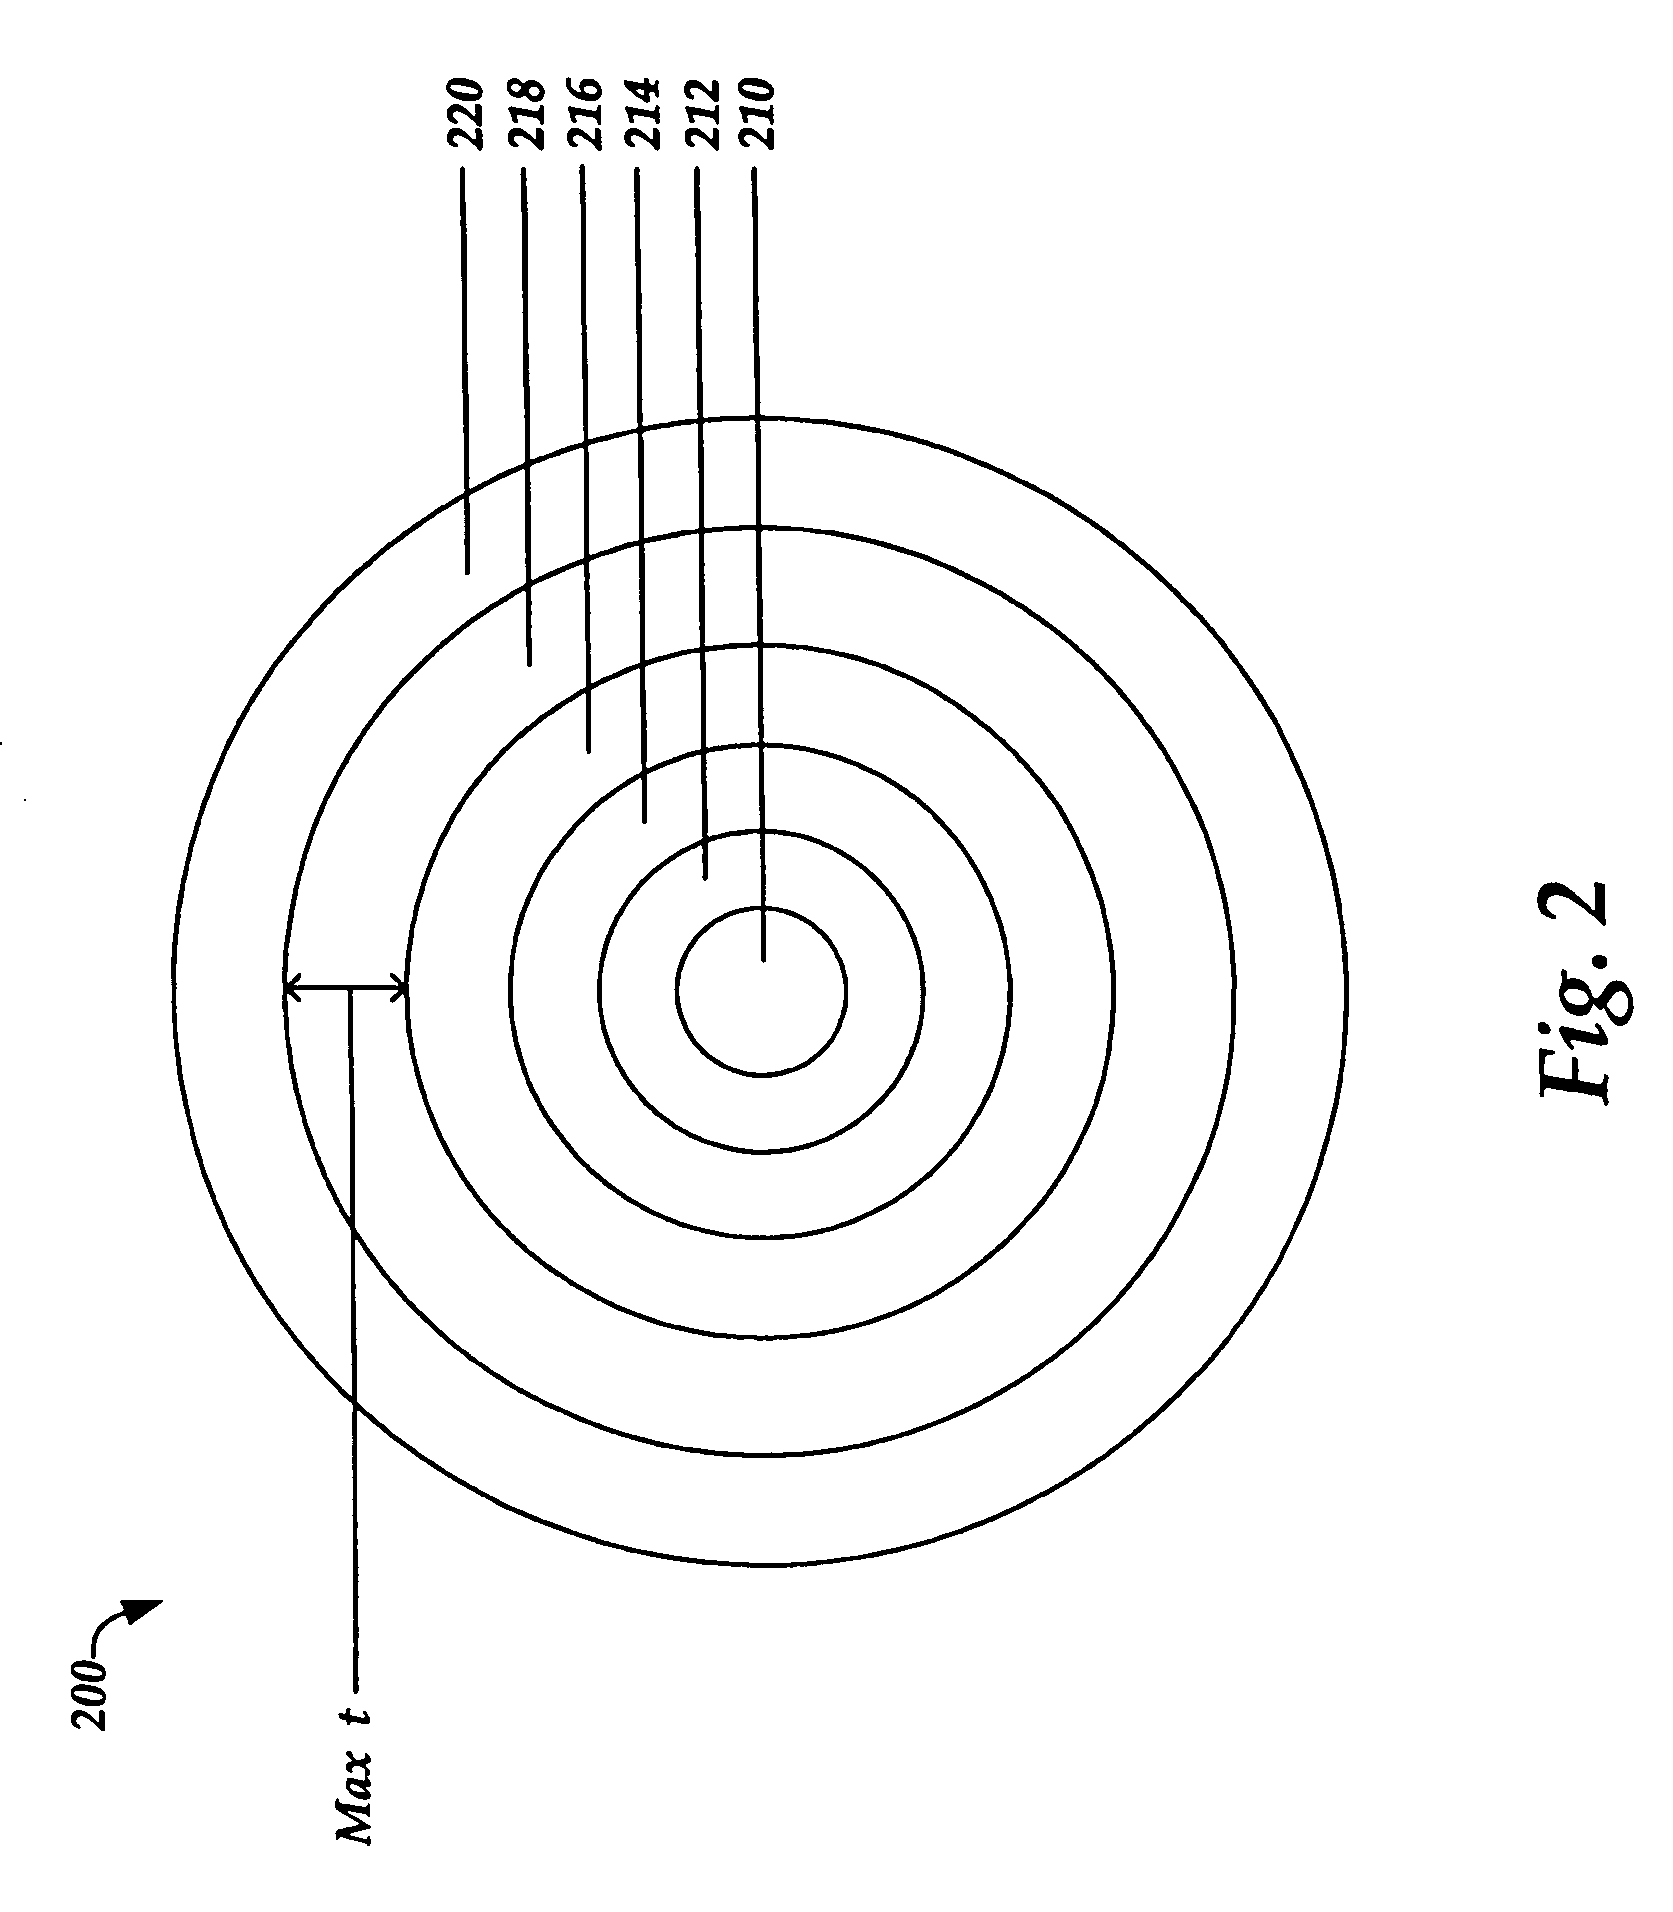 Compressible layer for fiber optic cable